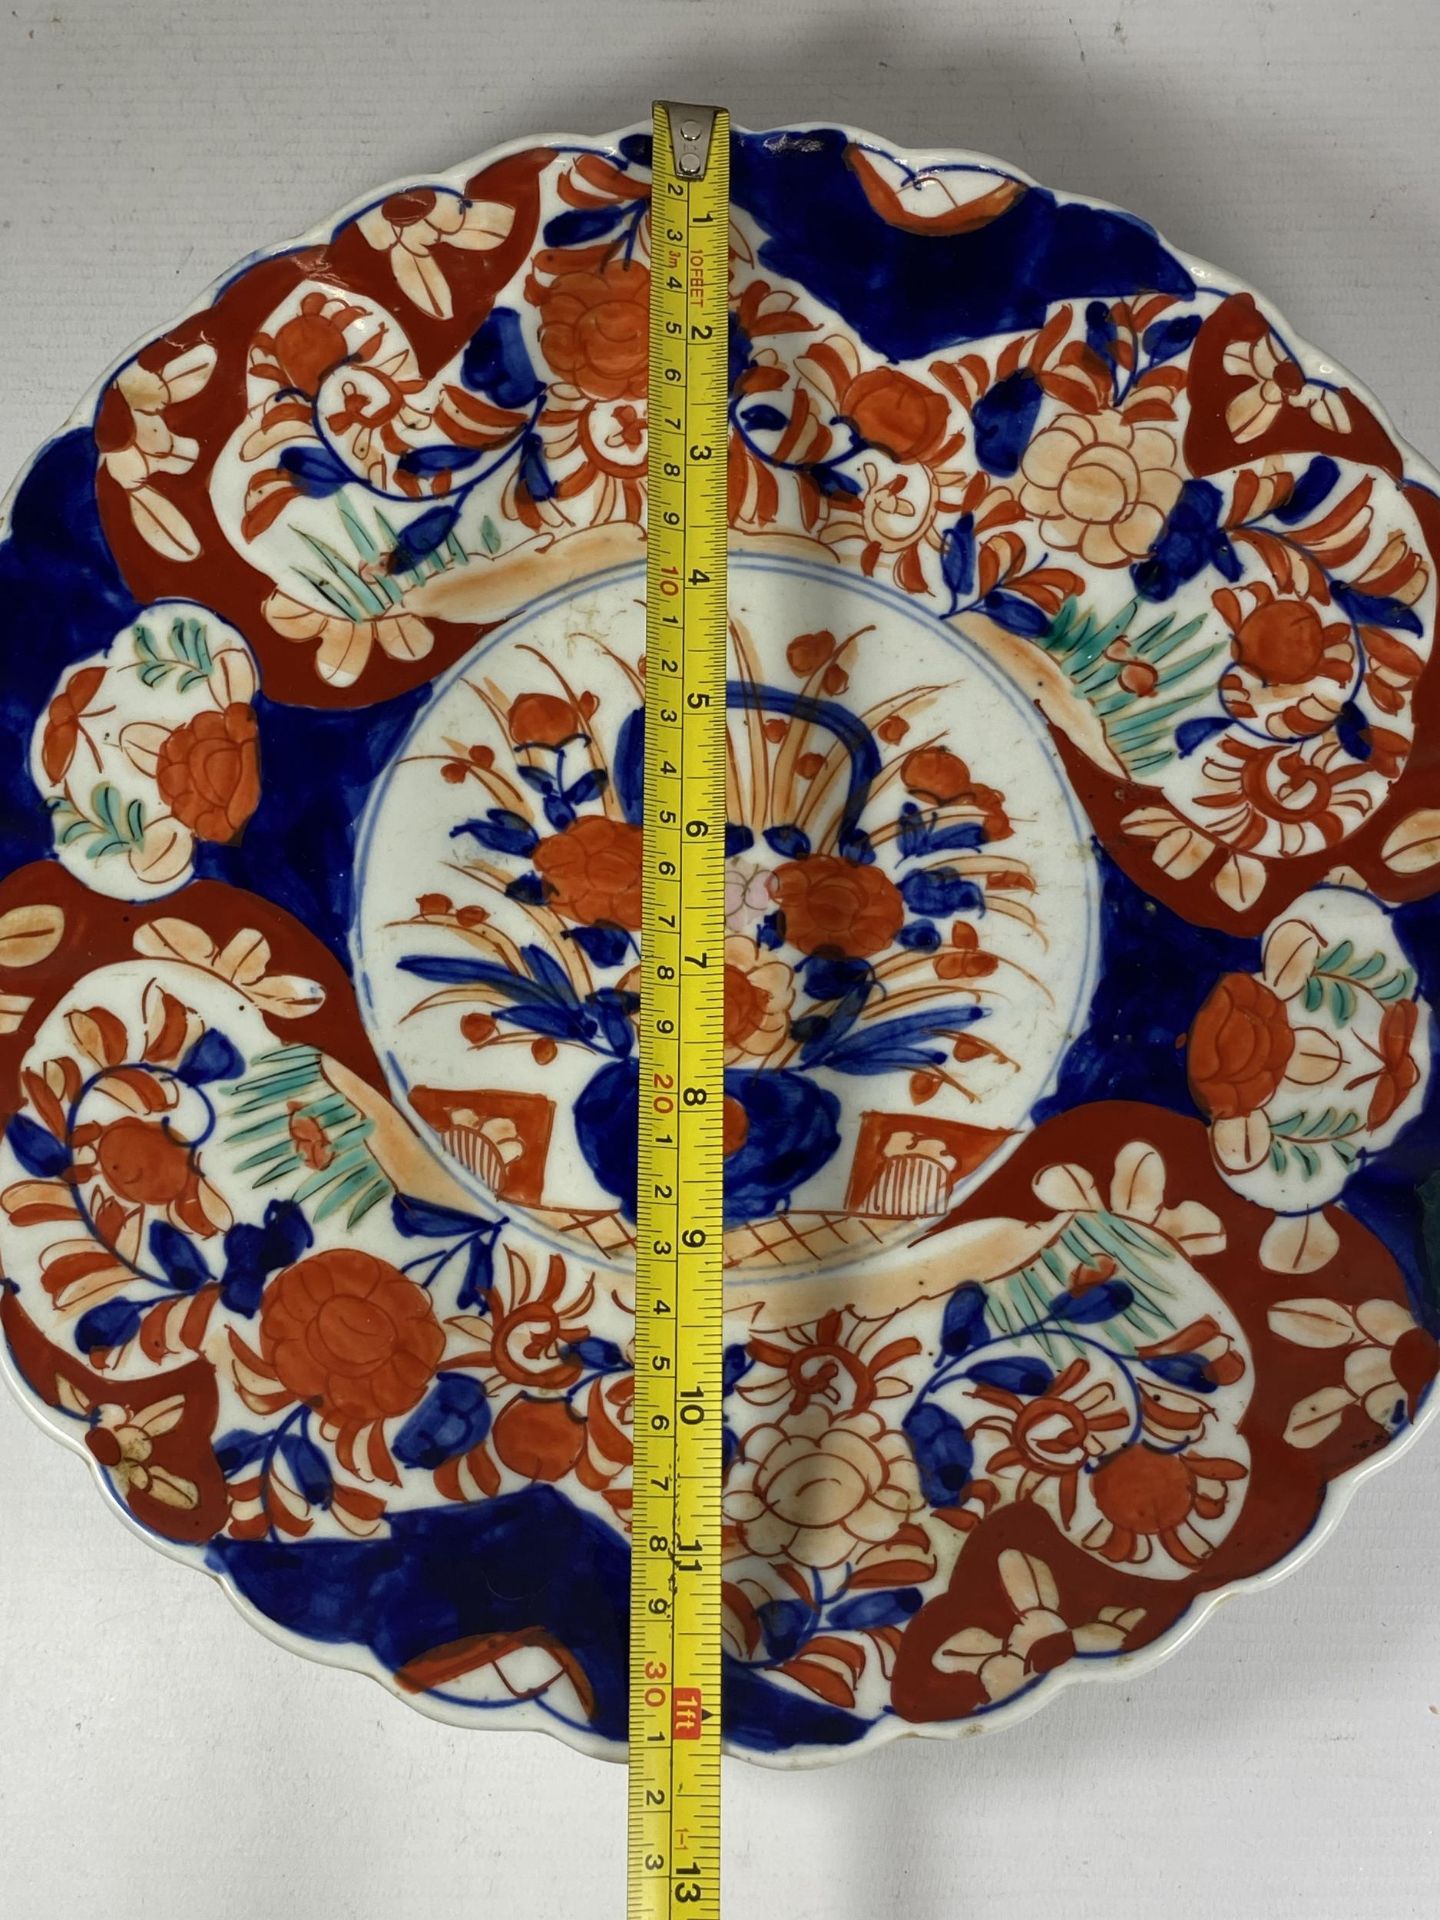 A LARGE JAPANESE MEIJI PERIOD (1868-1912) IMARI SCALLOPED RIM CHARGER WITH BASKET OF FLOWERS CENTRAL - Image 4 of 4